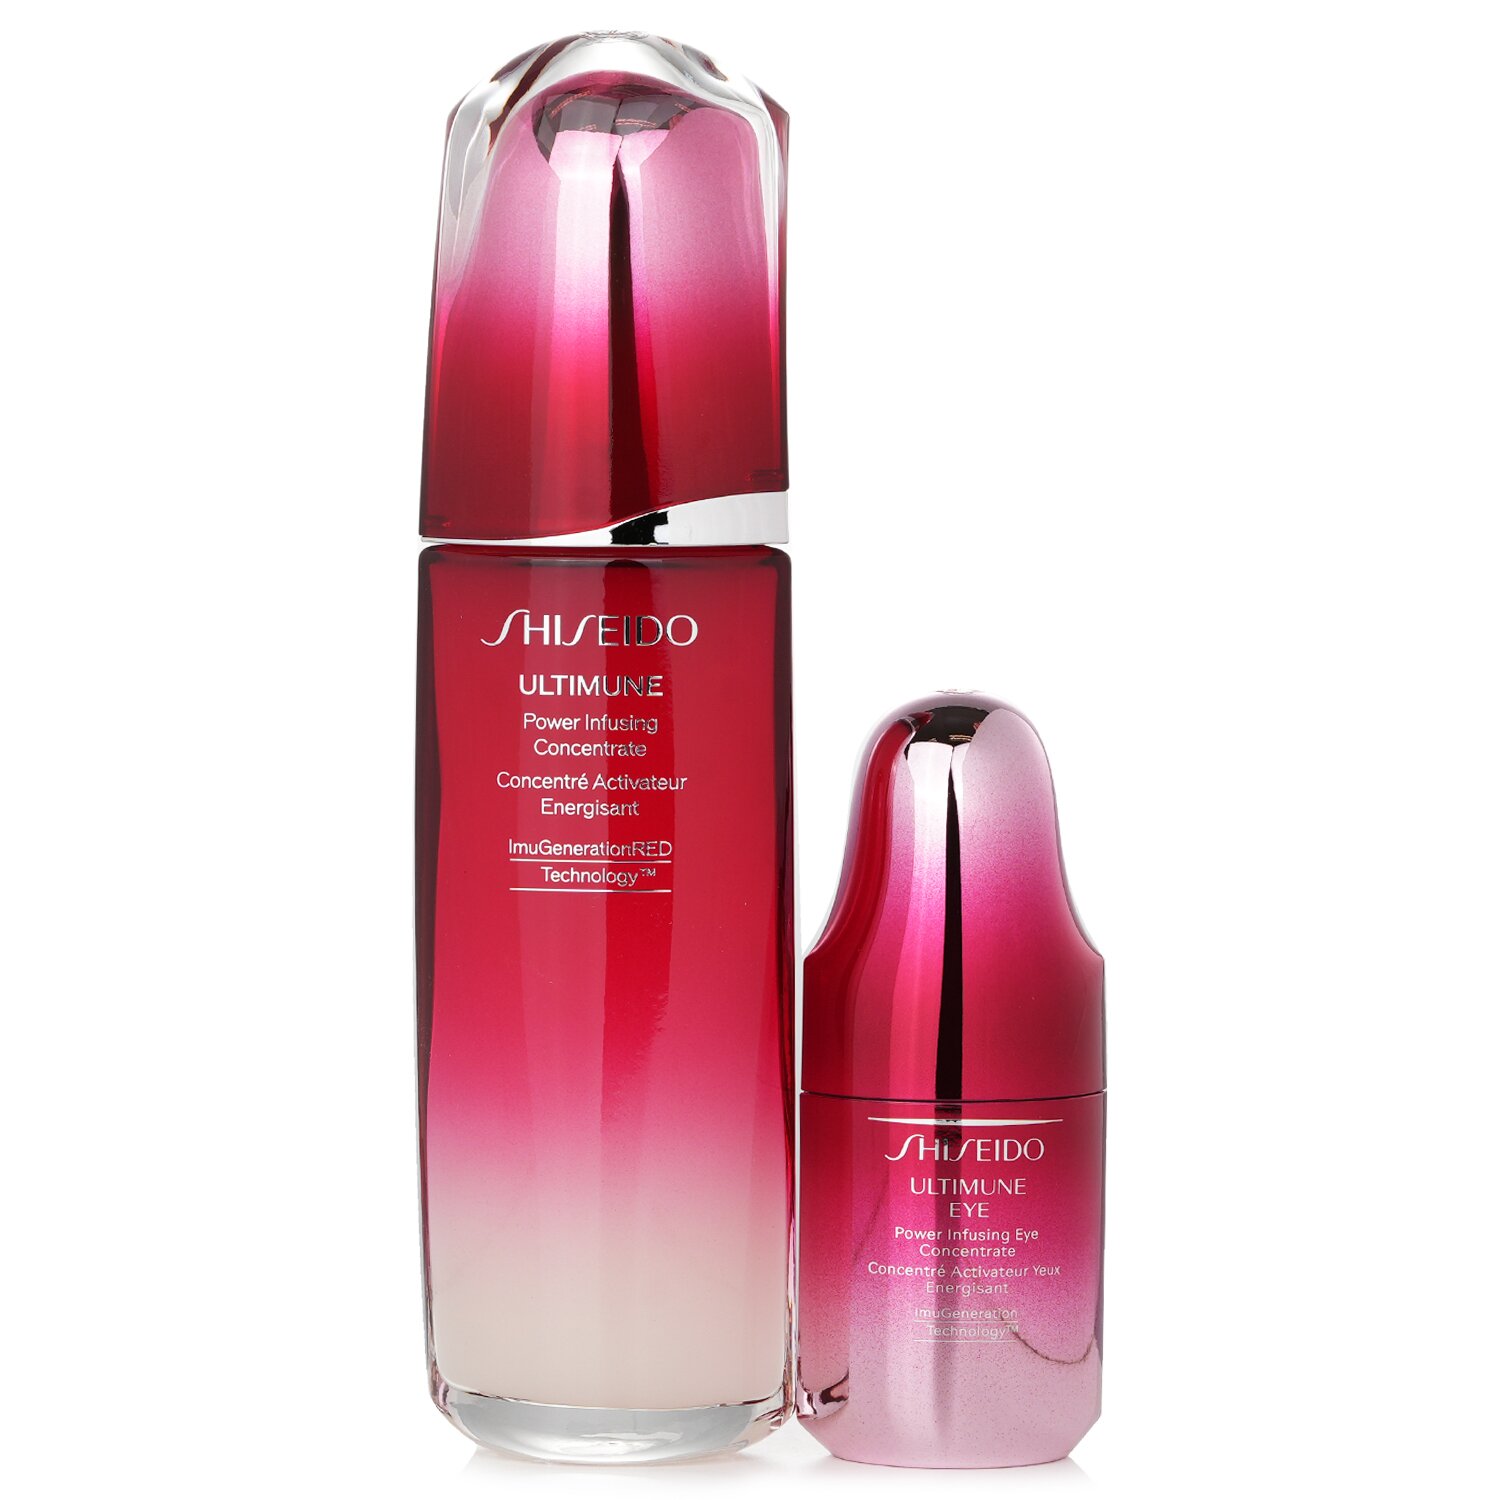 Shiseido Ultimune Power Infusing (ImuGenerationRED Technology) Set: Face Concentrate 100ml + Eye Concentrate 15ml 2pcs